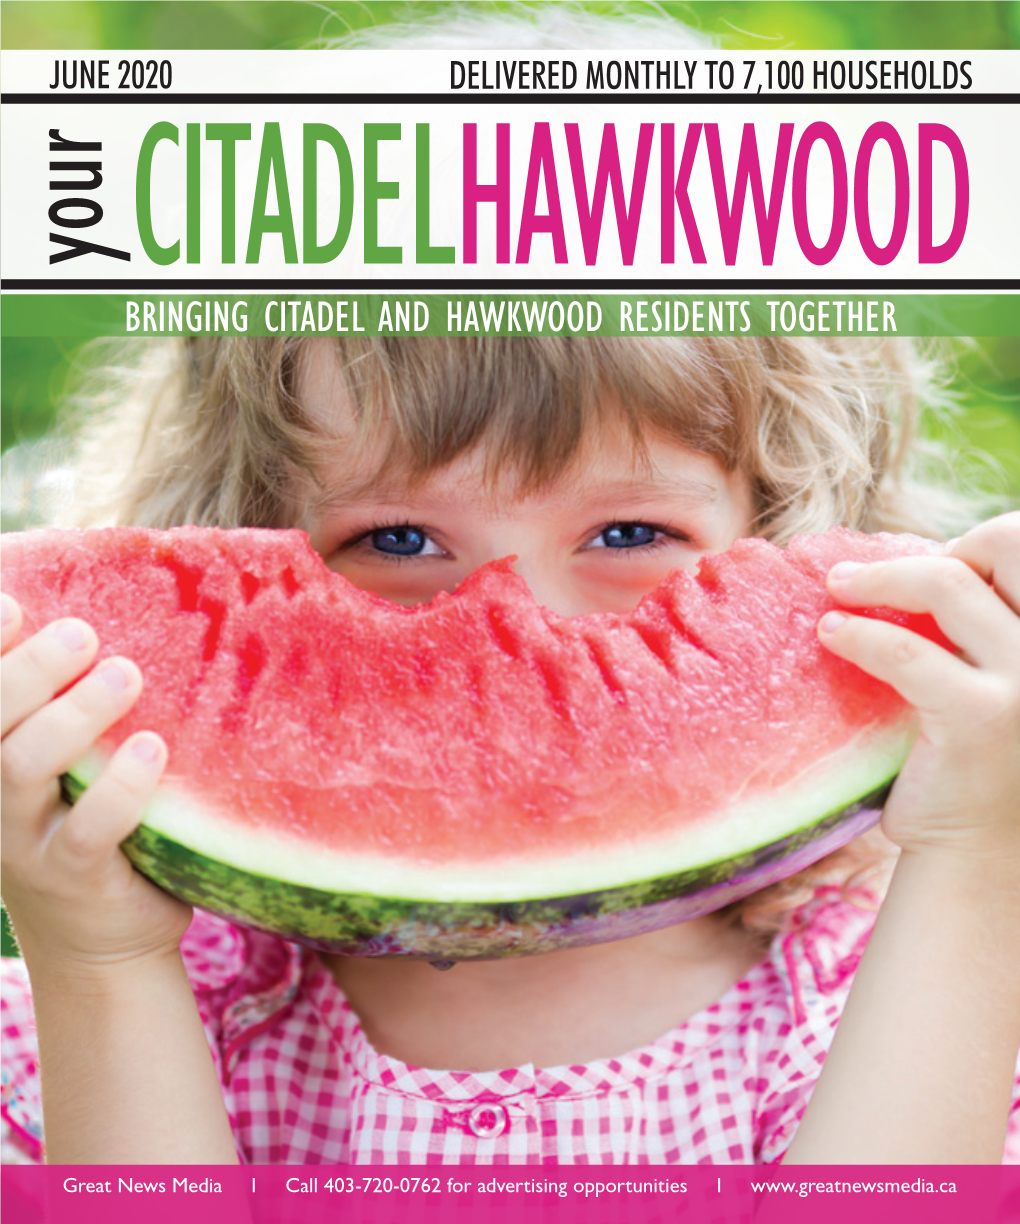 BRINGING CITADEL and HAWKWOOD RESIDENTSTOGETHER Your DELIVERED MONTHLY to 7,100HOUSEHOLDS Cambridge Opening Manor June 2020